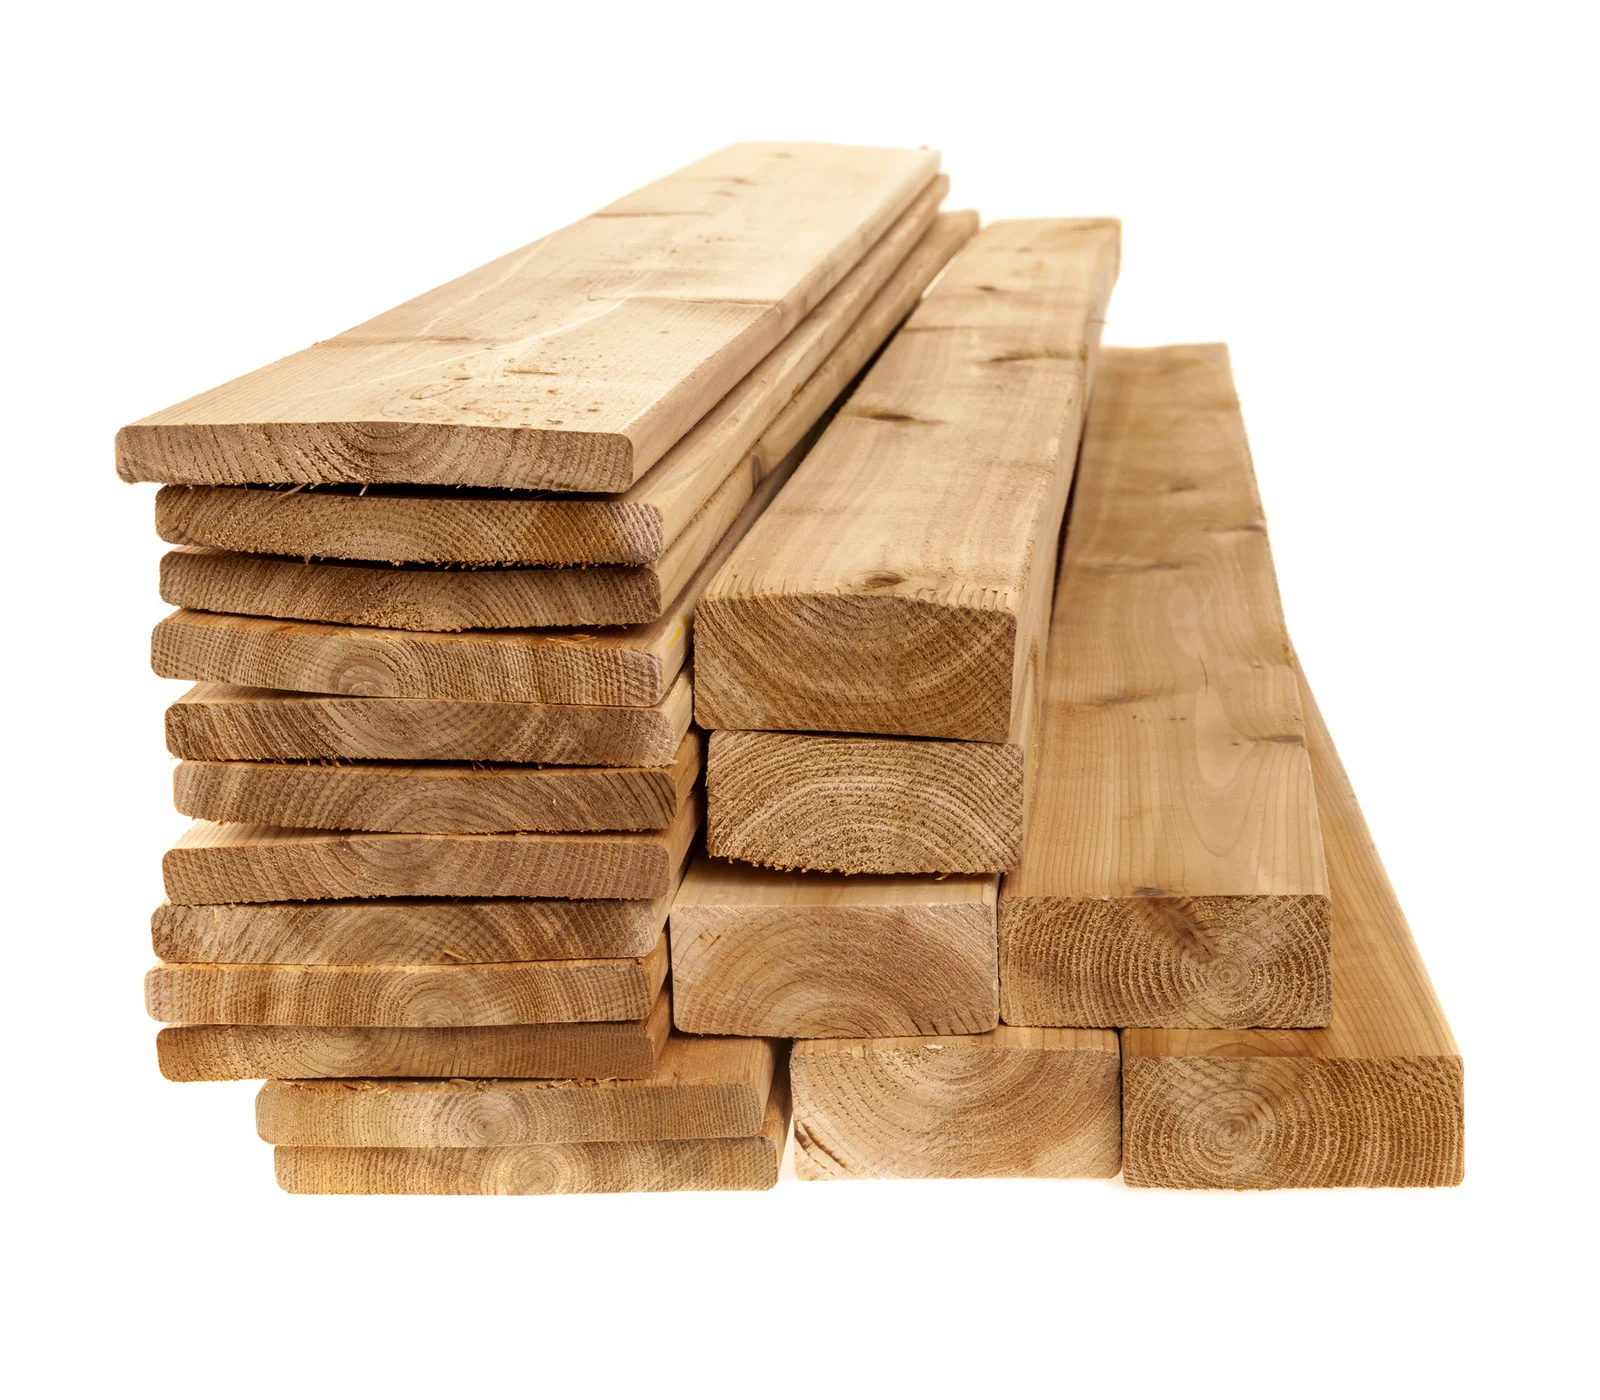 A stack of dimensional lumber